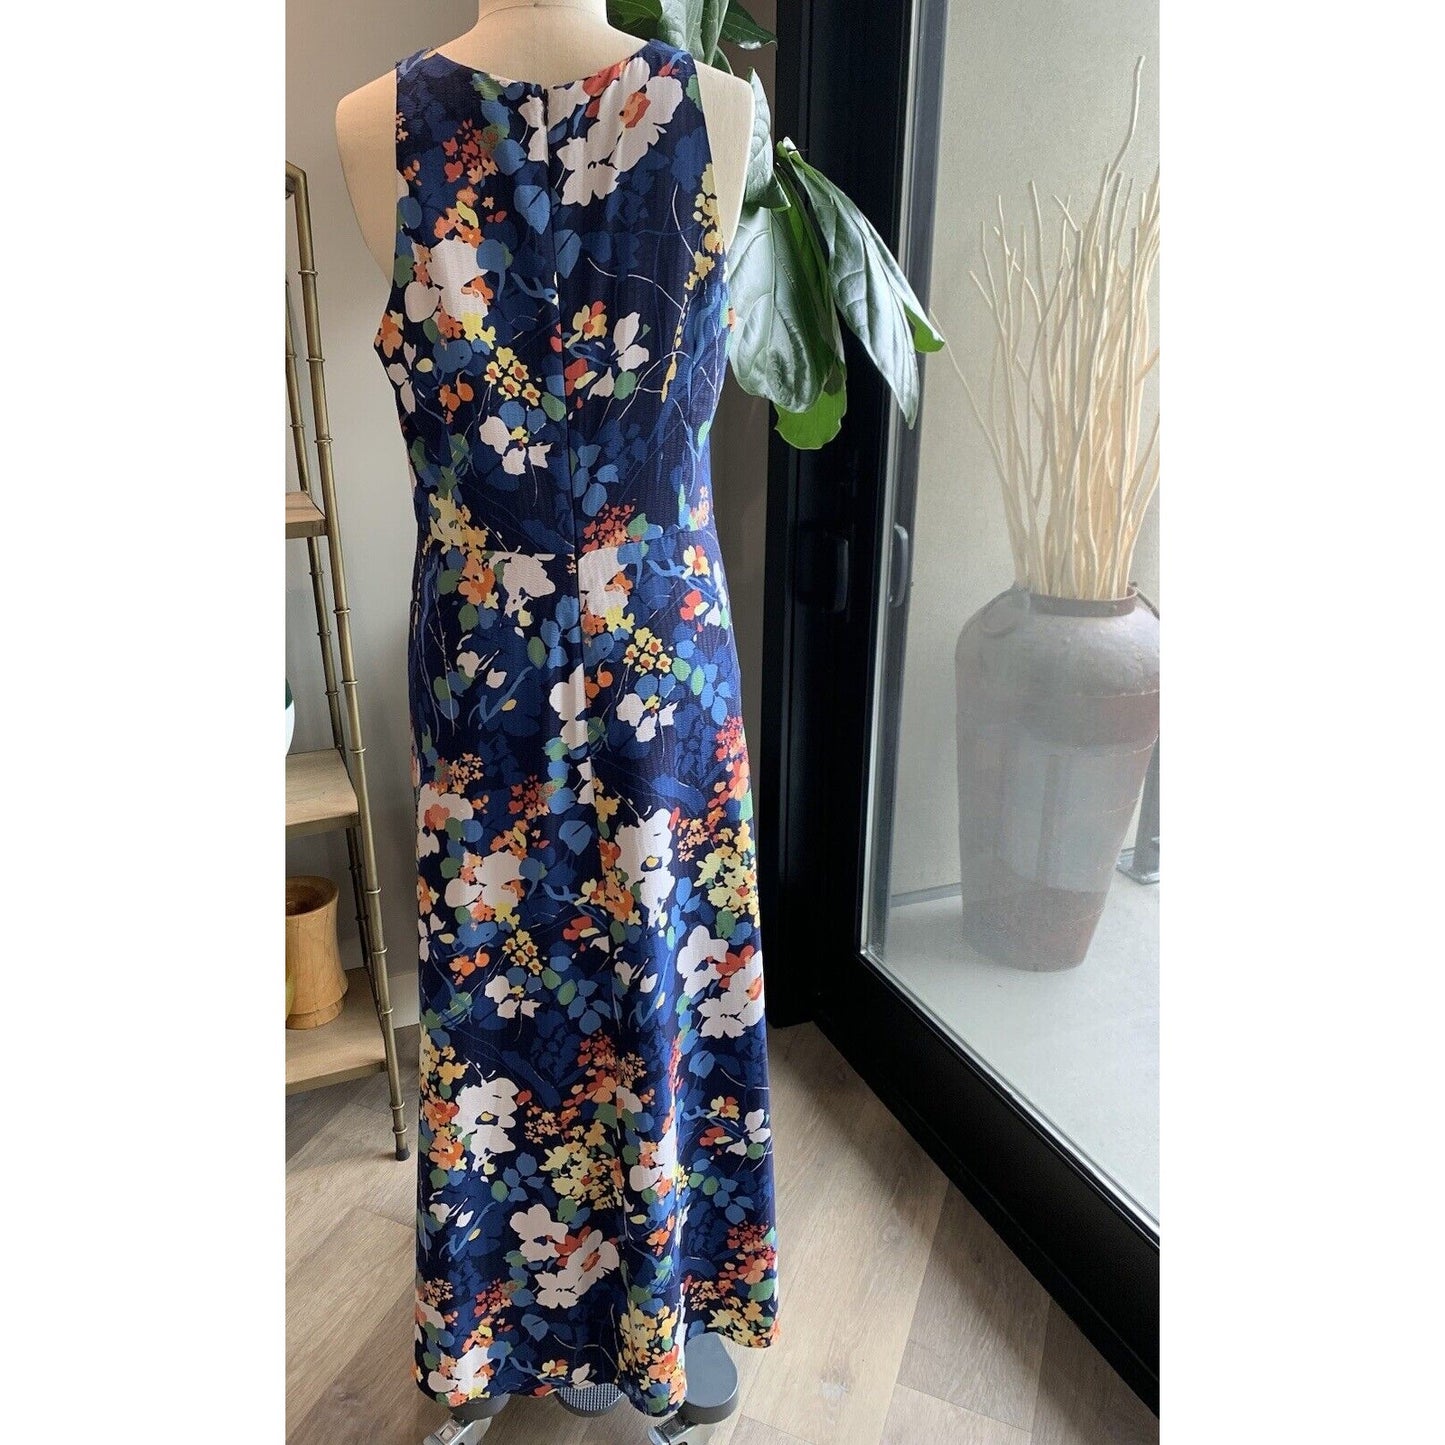 Back View Of Floral Maxi Dress